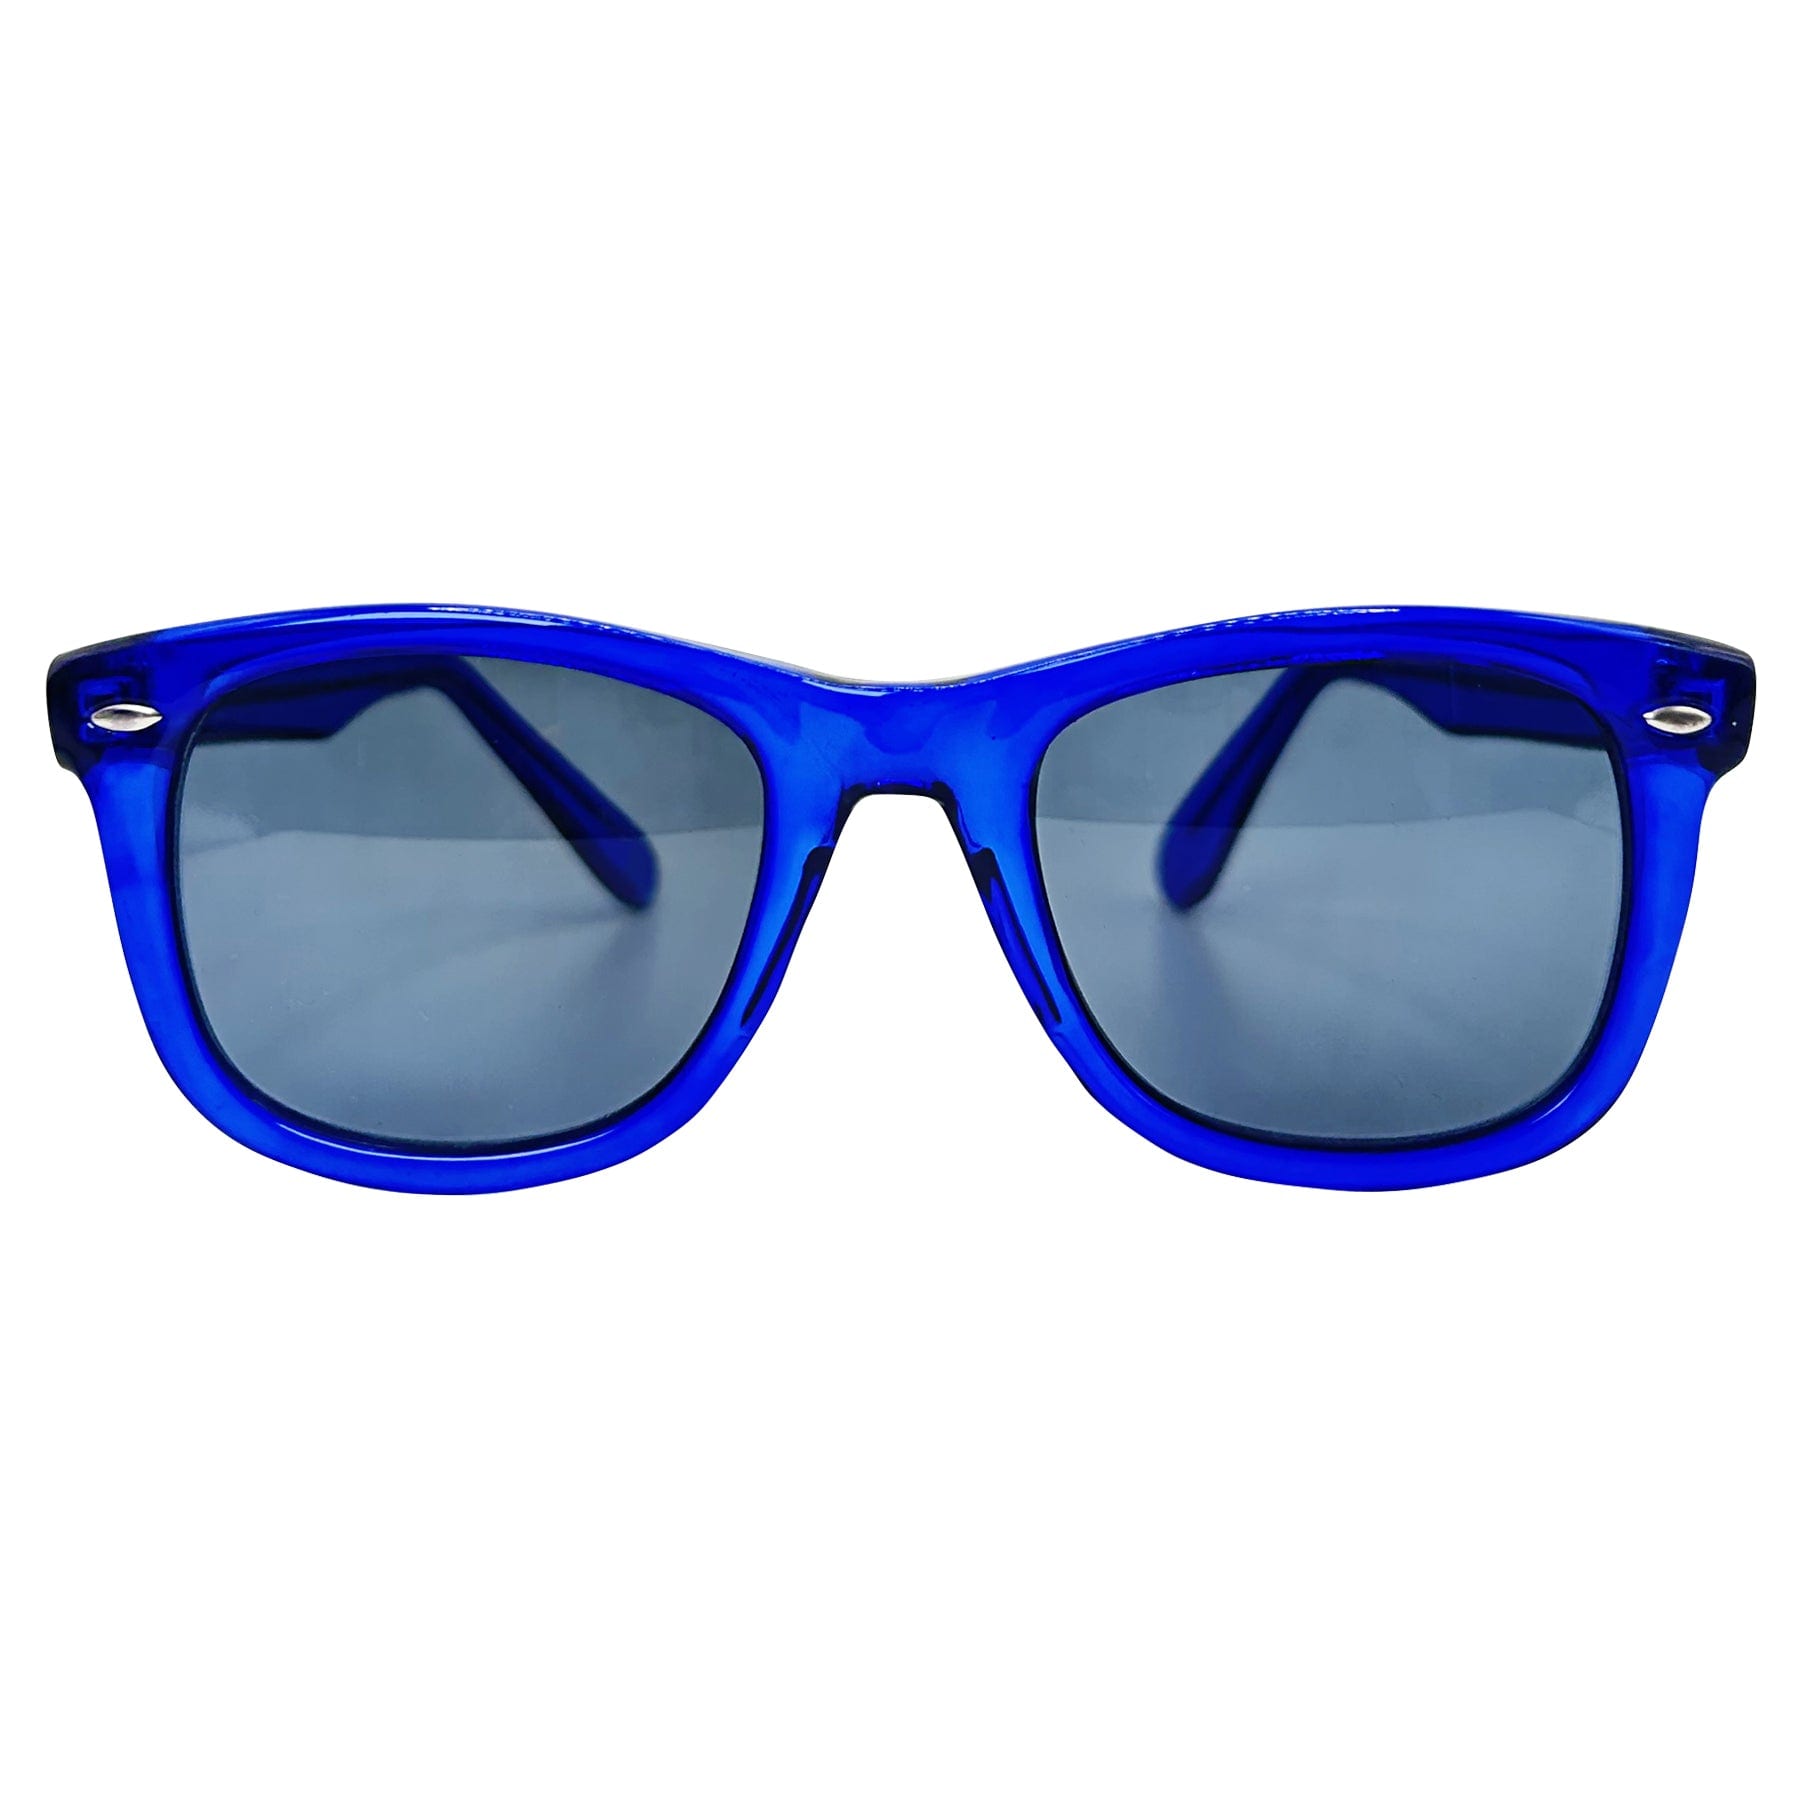 vintage sunglasses with a crystal blue classic frame